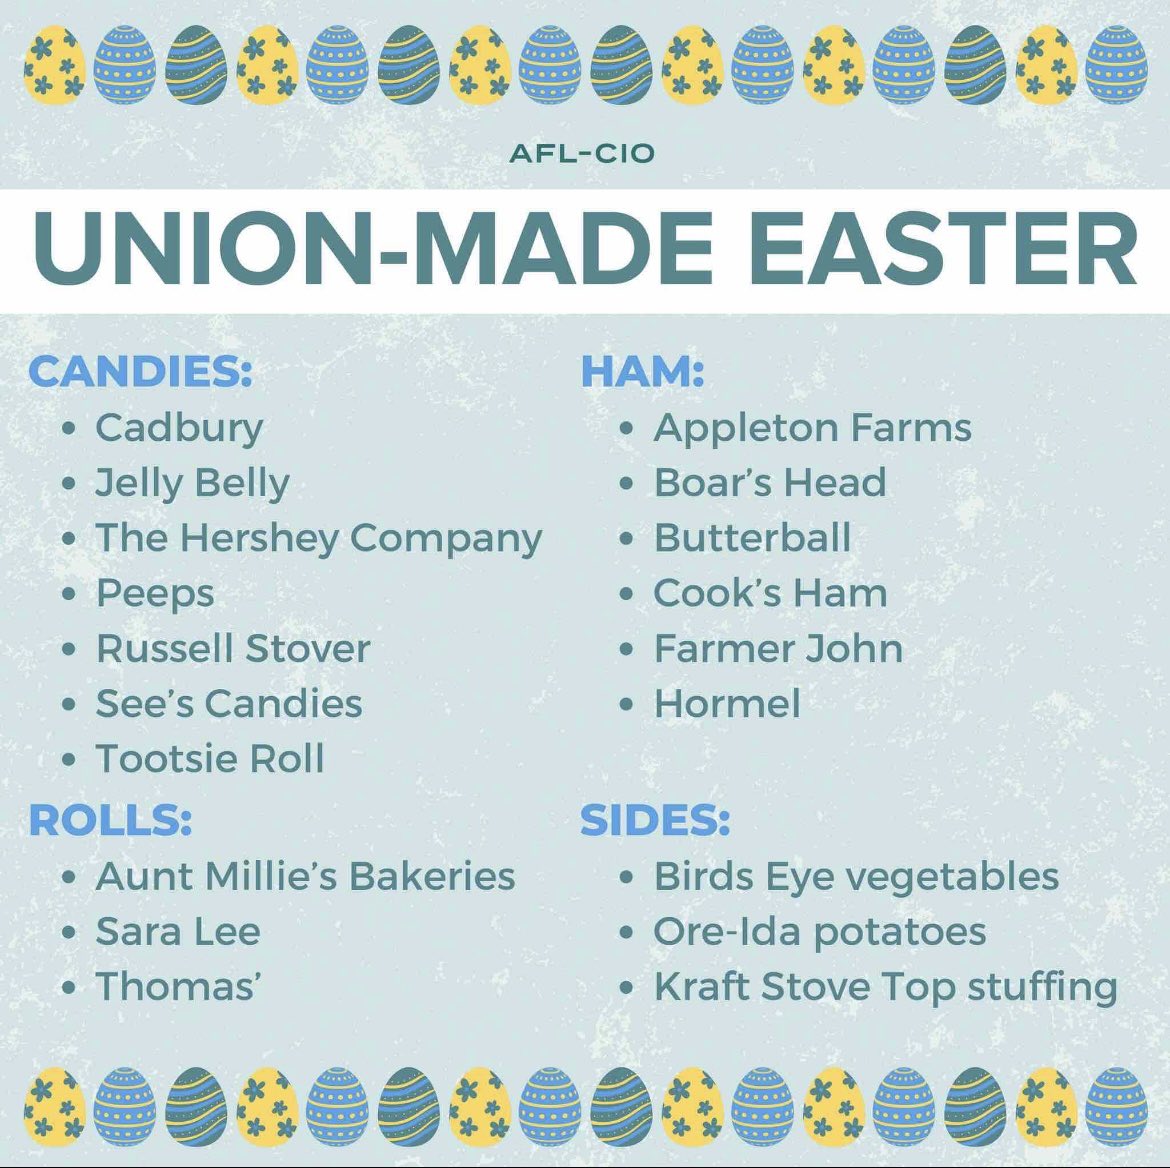 While you prepare for Easter, make sure to support Union labor! #UnionStrong #LaborStrong